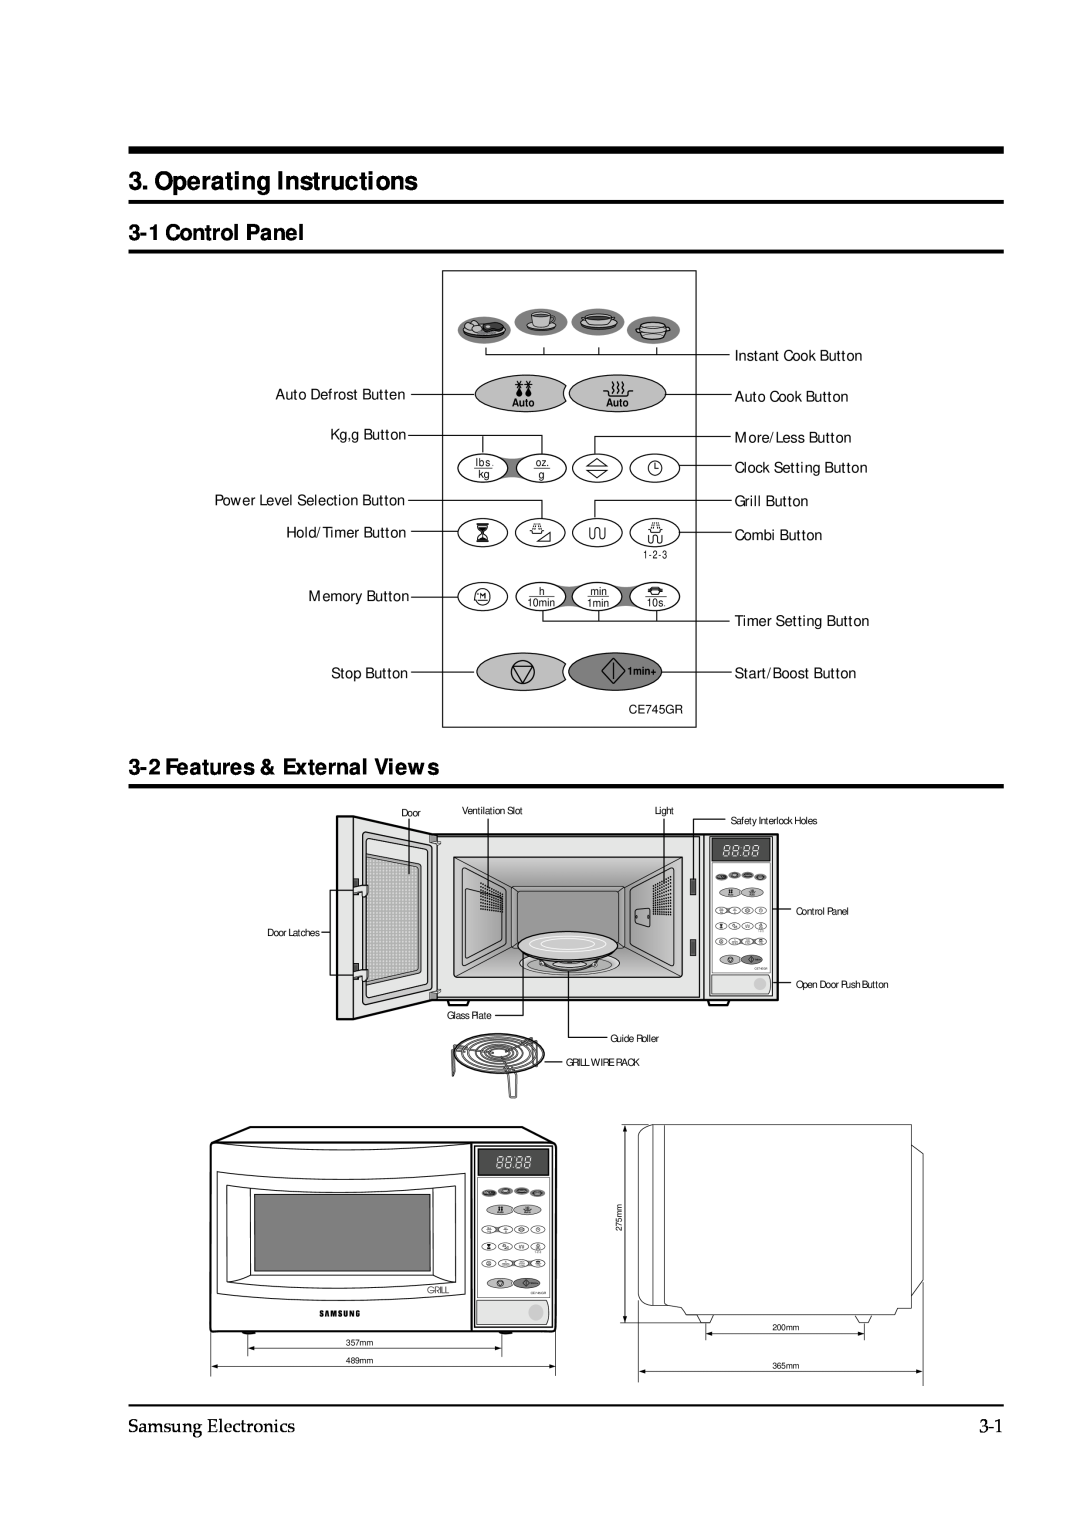 Samsung CE745GR service manual Operating Instructions, Control Panel, Features & External Views 